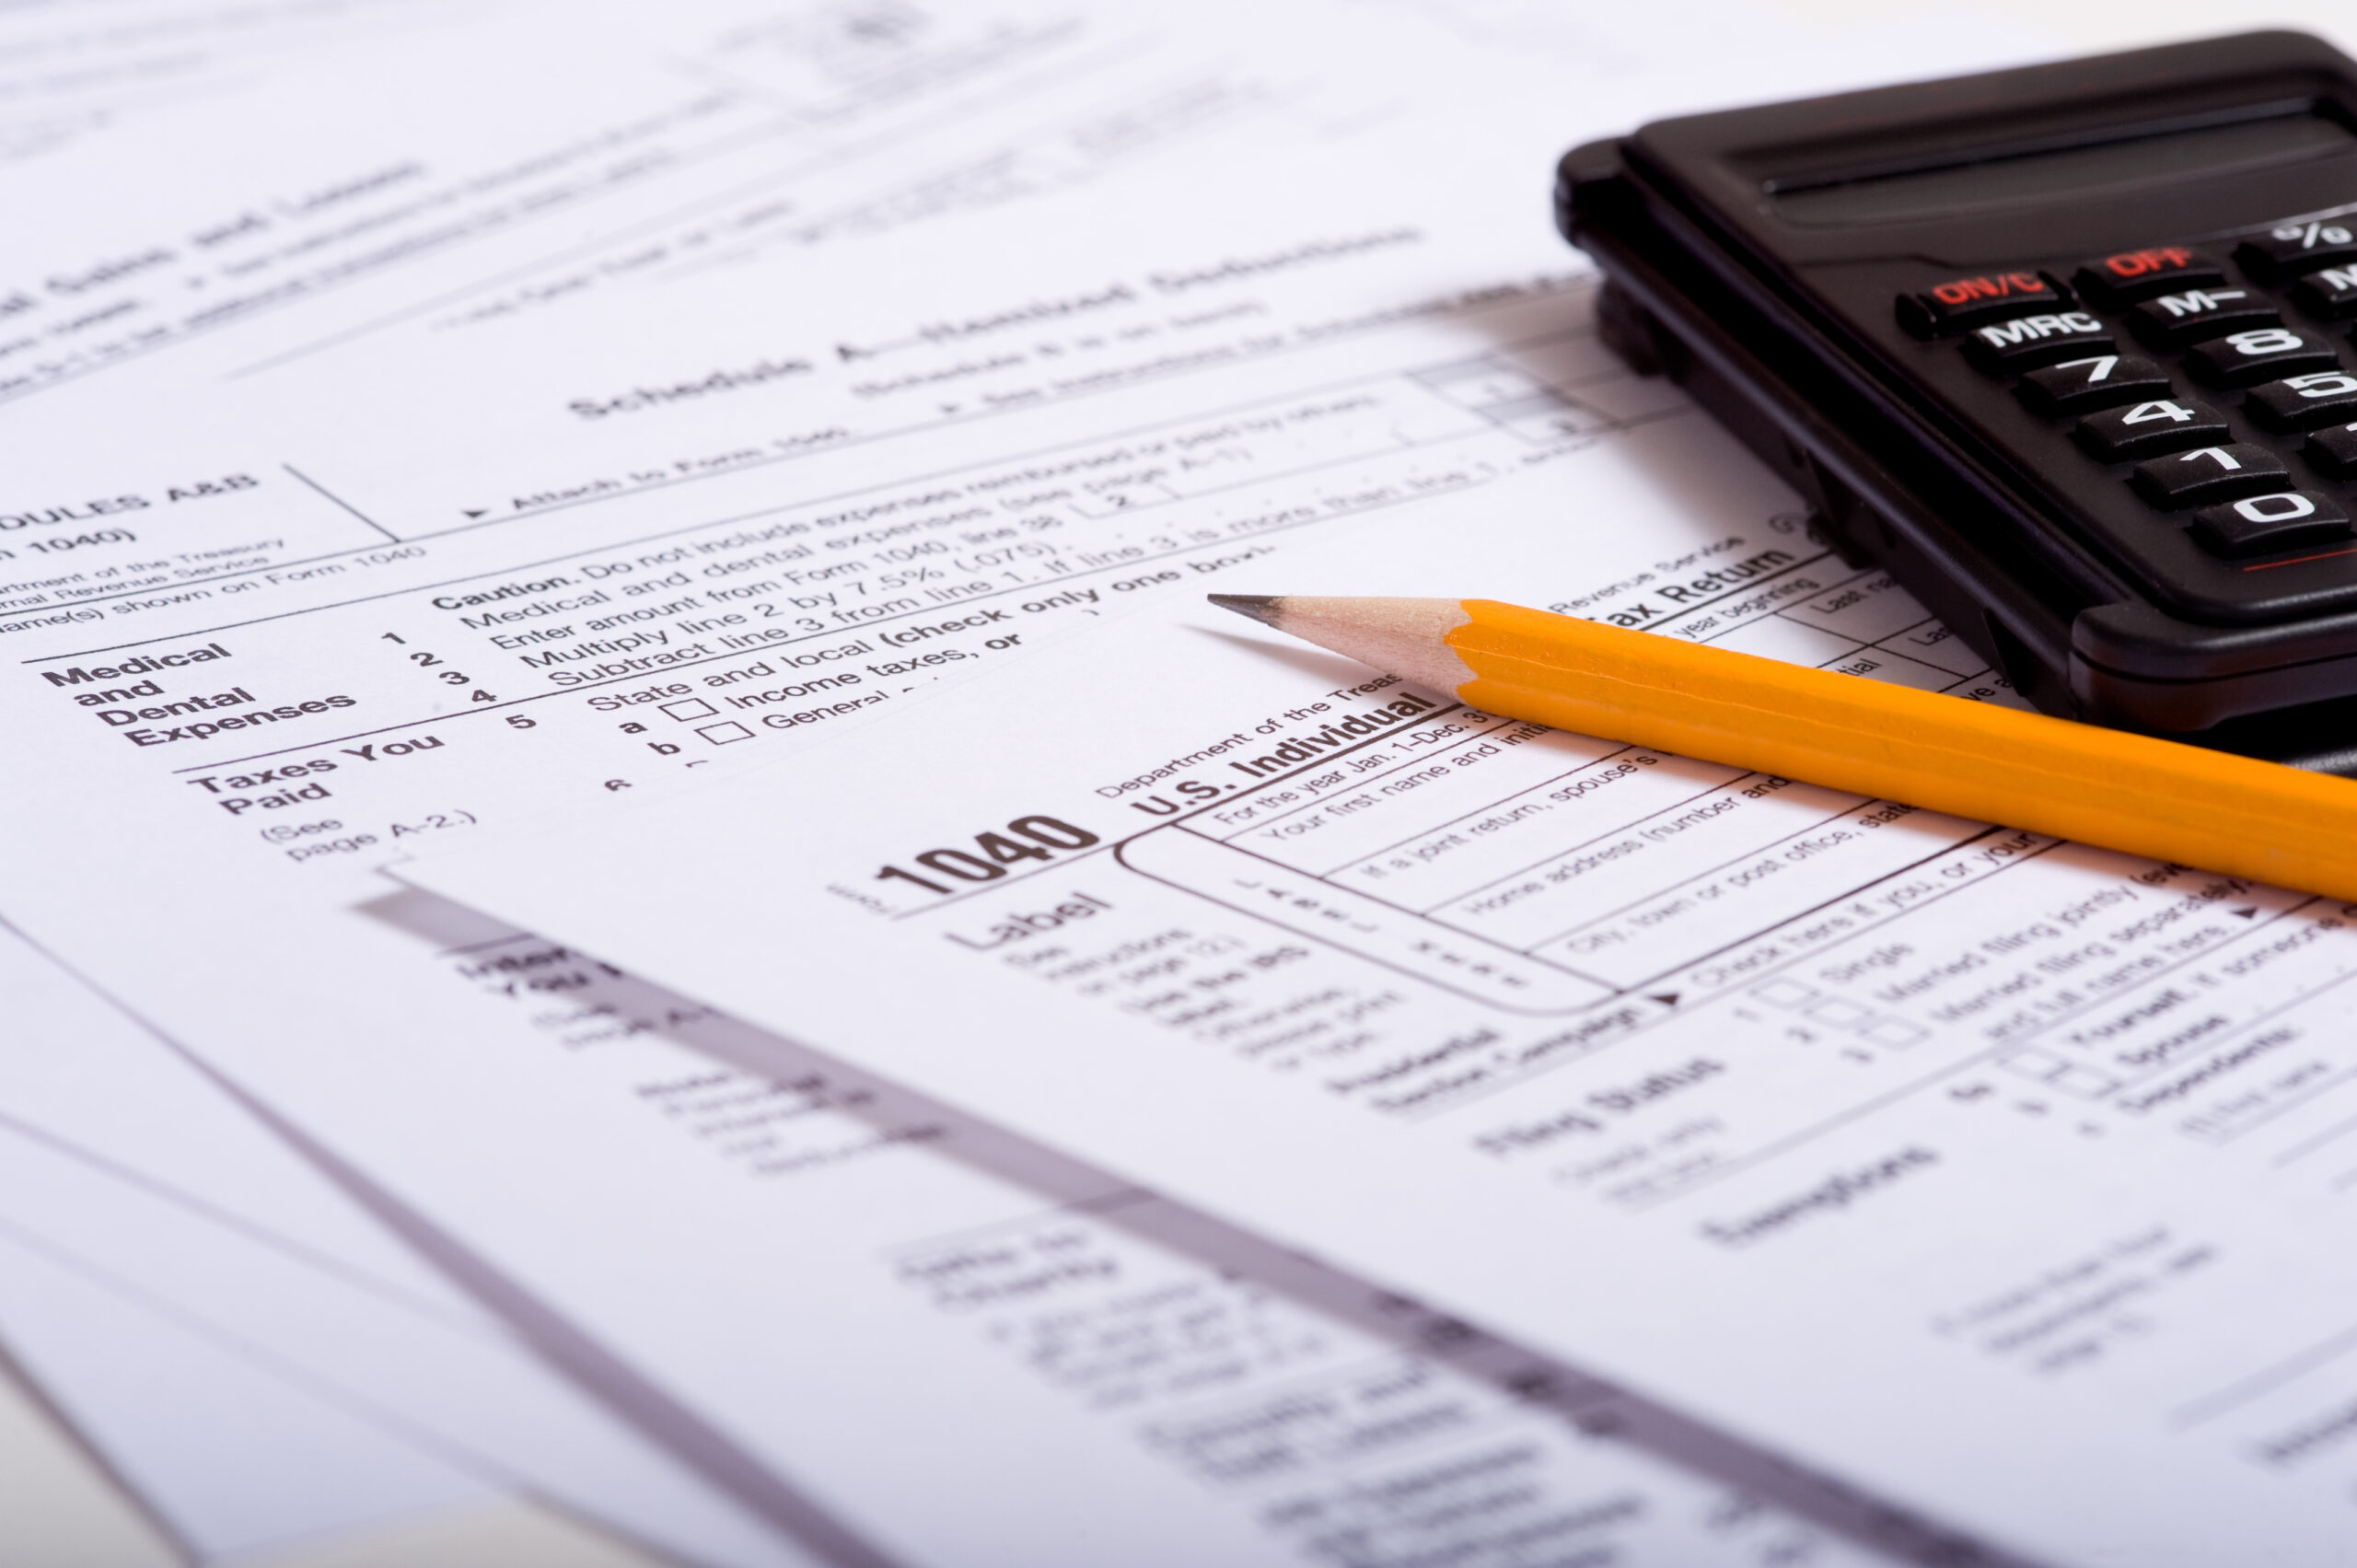 Tax prepaation items including a pencil, calculator and tax forms